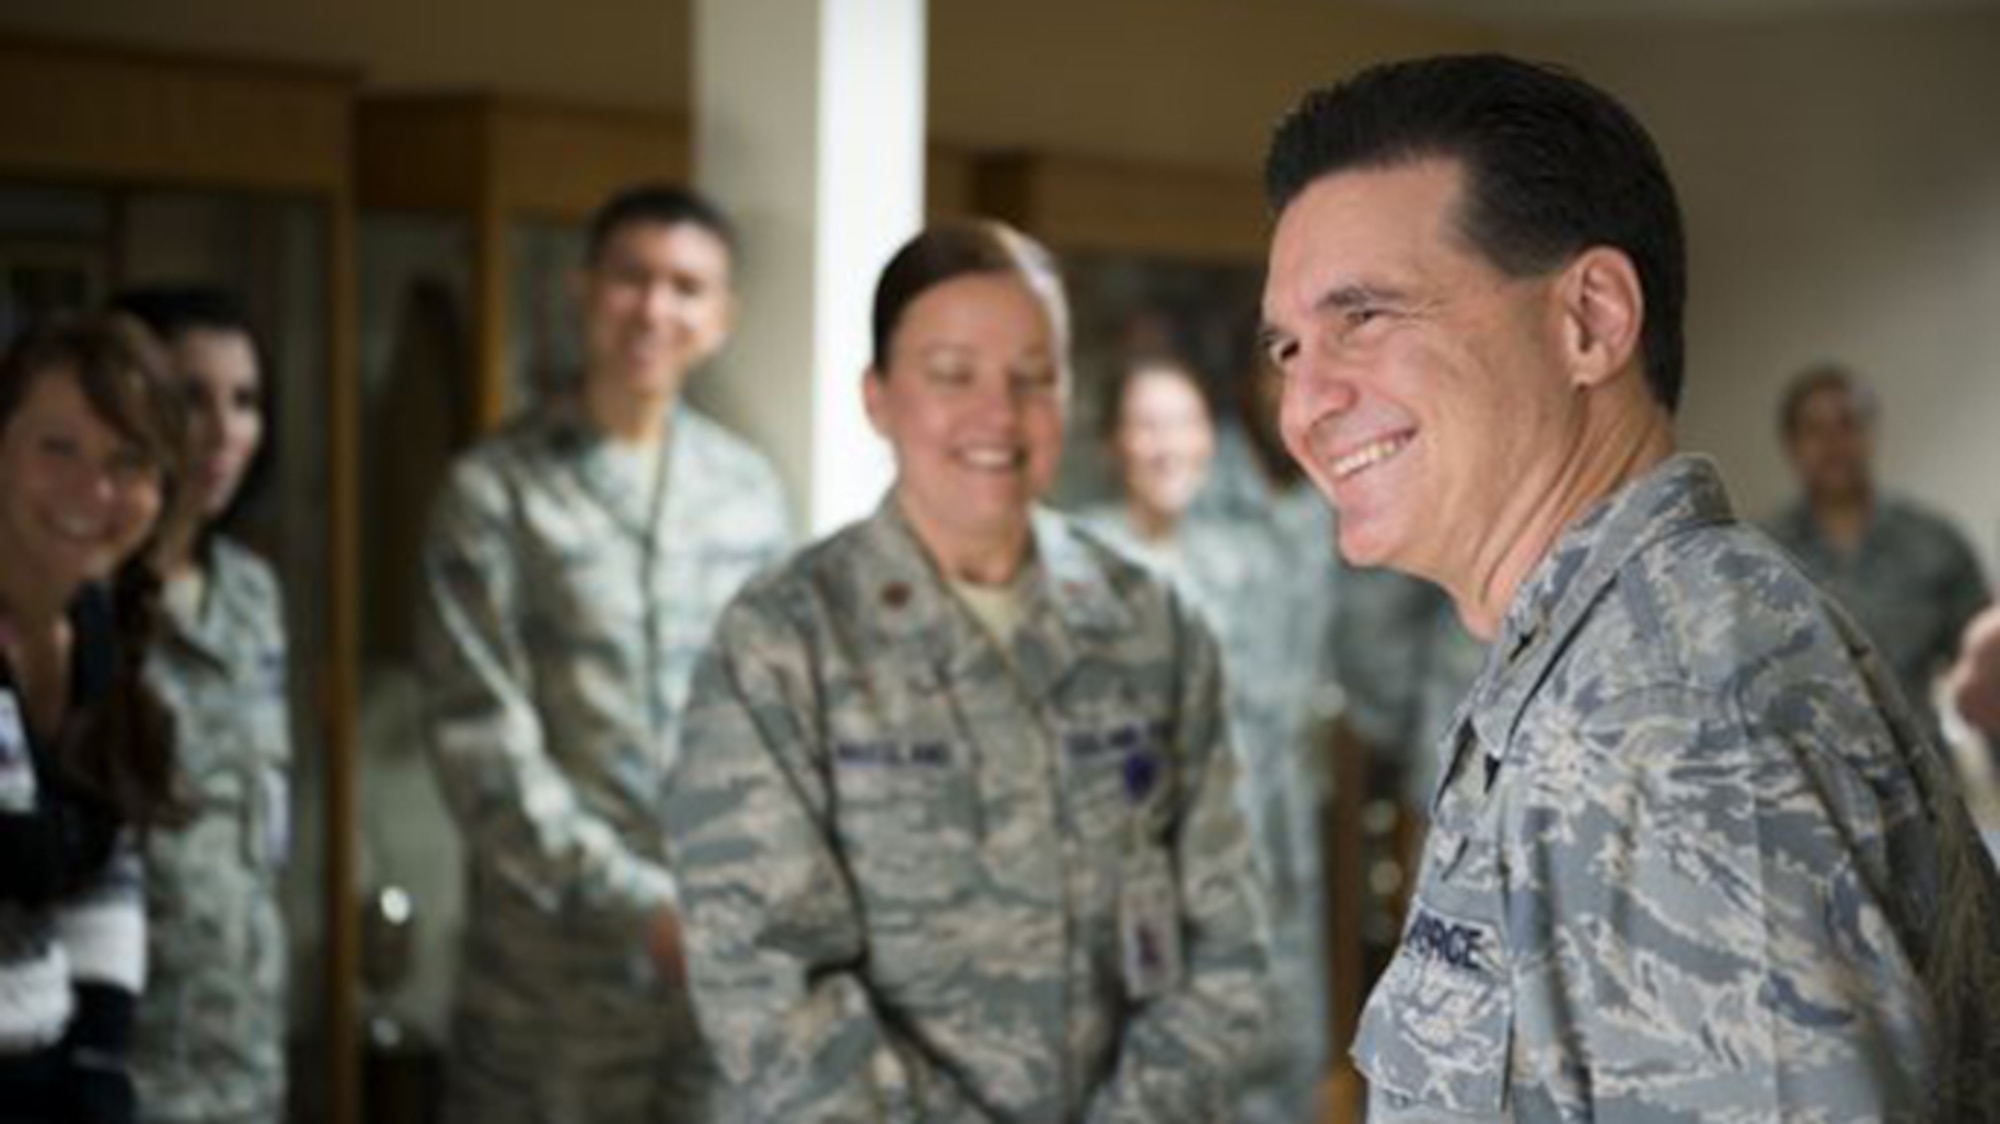 U.S. Air Force Brig. Gen. (Dr.) Sean Murphy, Air Combat Command surgeon general, jokes with Airmen from the 23rd Medical Group Nov. 19, 2014, at Moody Air Force Base, Ga. Murphy took over as the ACC surgeon general in September 2014. (U.S. Air Force photo by Airman 1st Class Ryan Callaghan/Released)